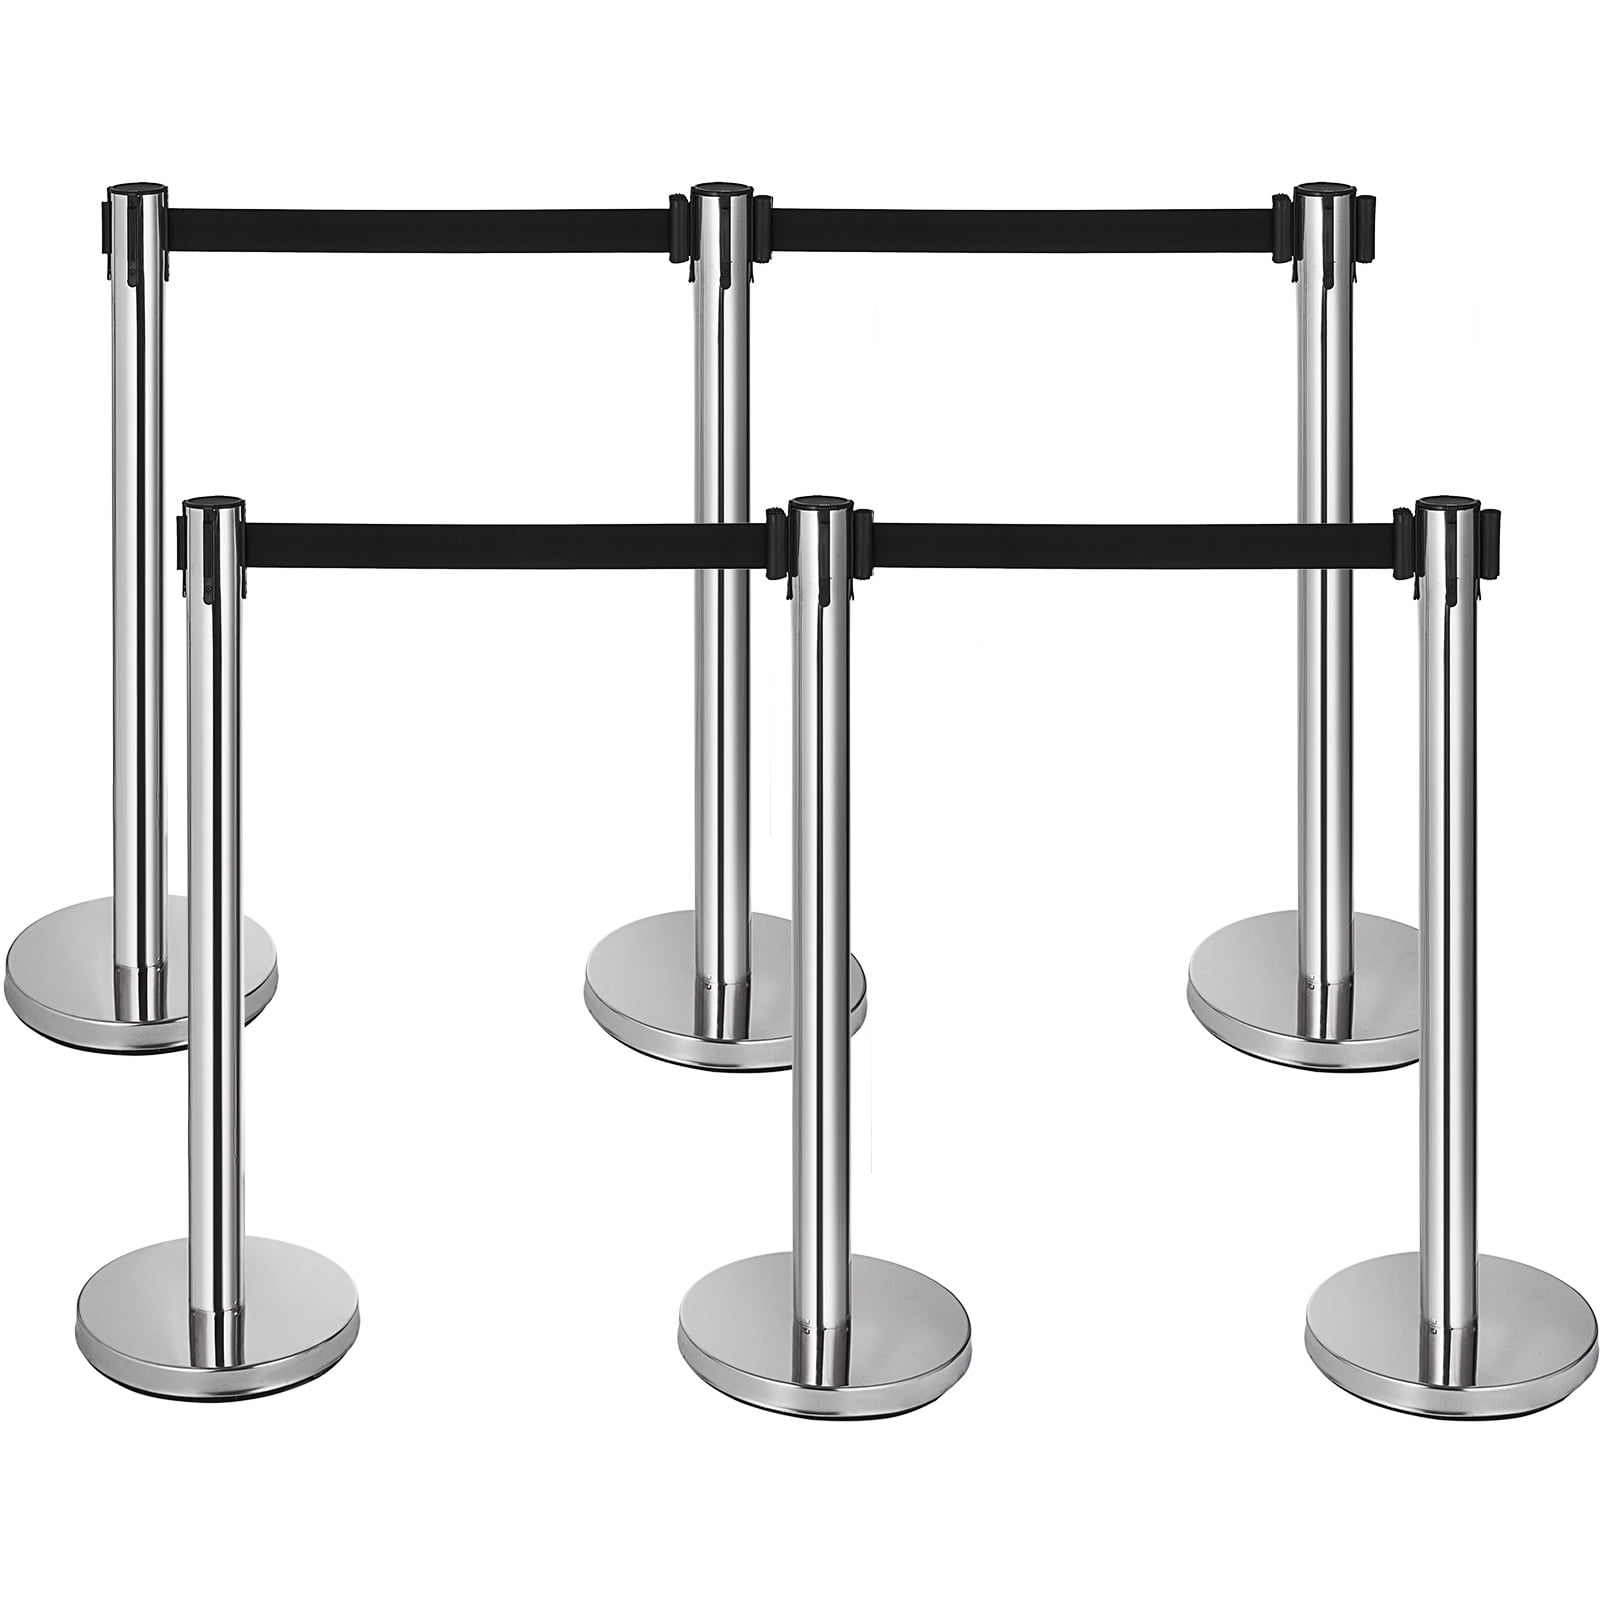 Set of 2 Matte Black SRB-A2BK Outwaters Stanchions with Retractable 6.5 Foot Belt and 39-Inch Crowd Control Fixtures with ABS Weighted Plastic Base 